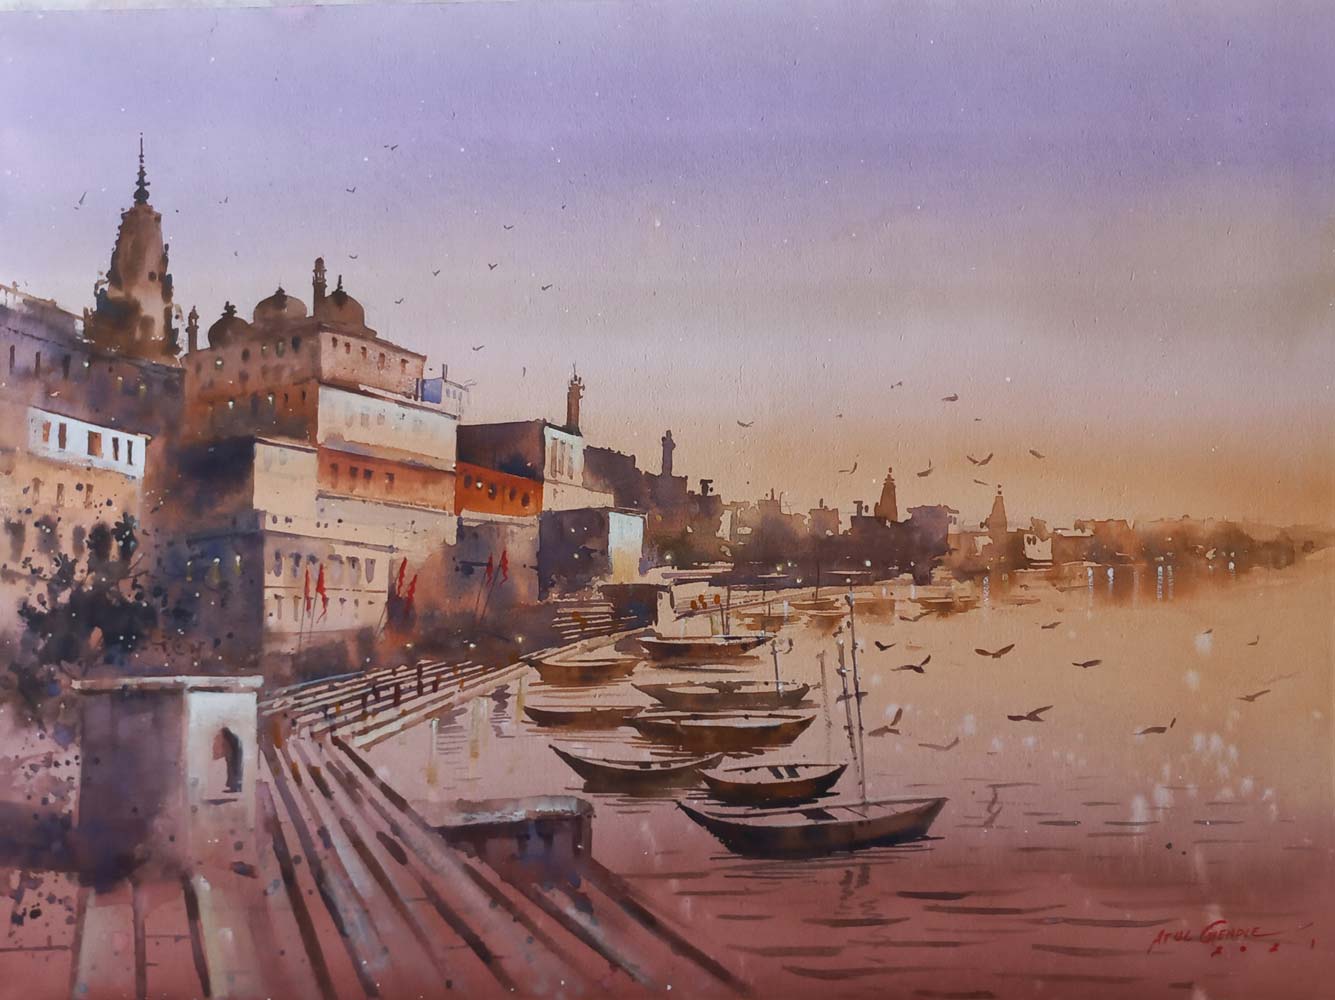 Realism Painting with Watercolor on Paper "Banaras Ghat" art by Atul Kishan Gendle